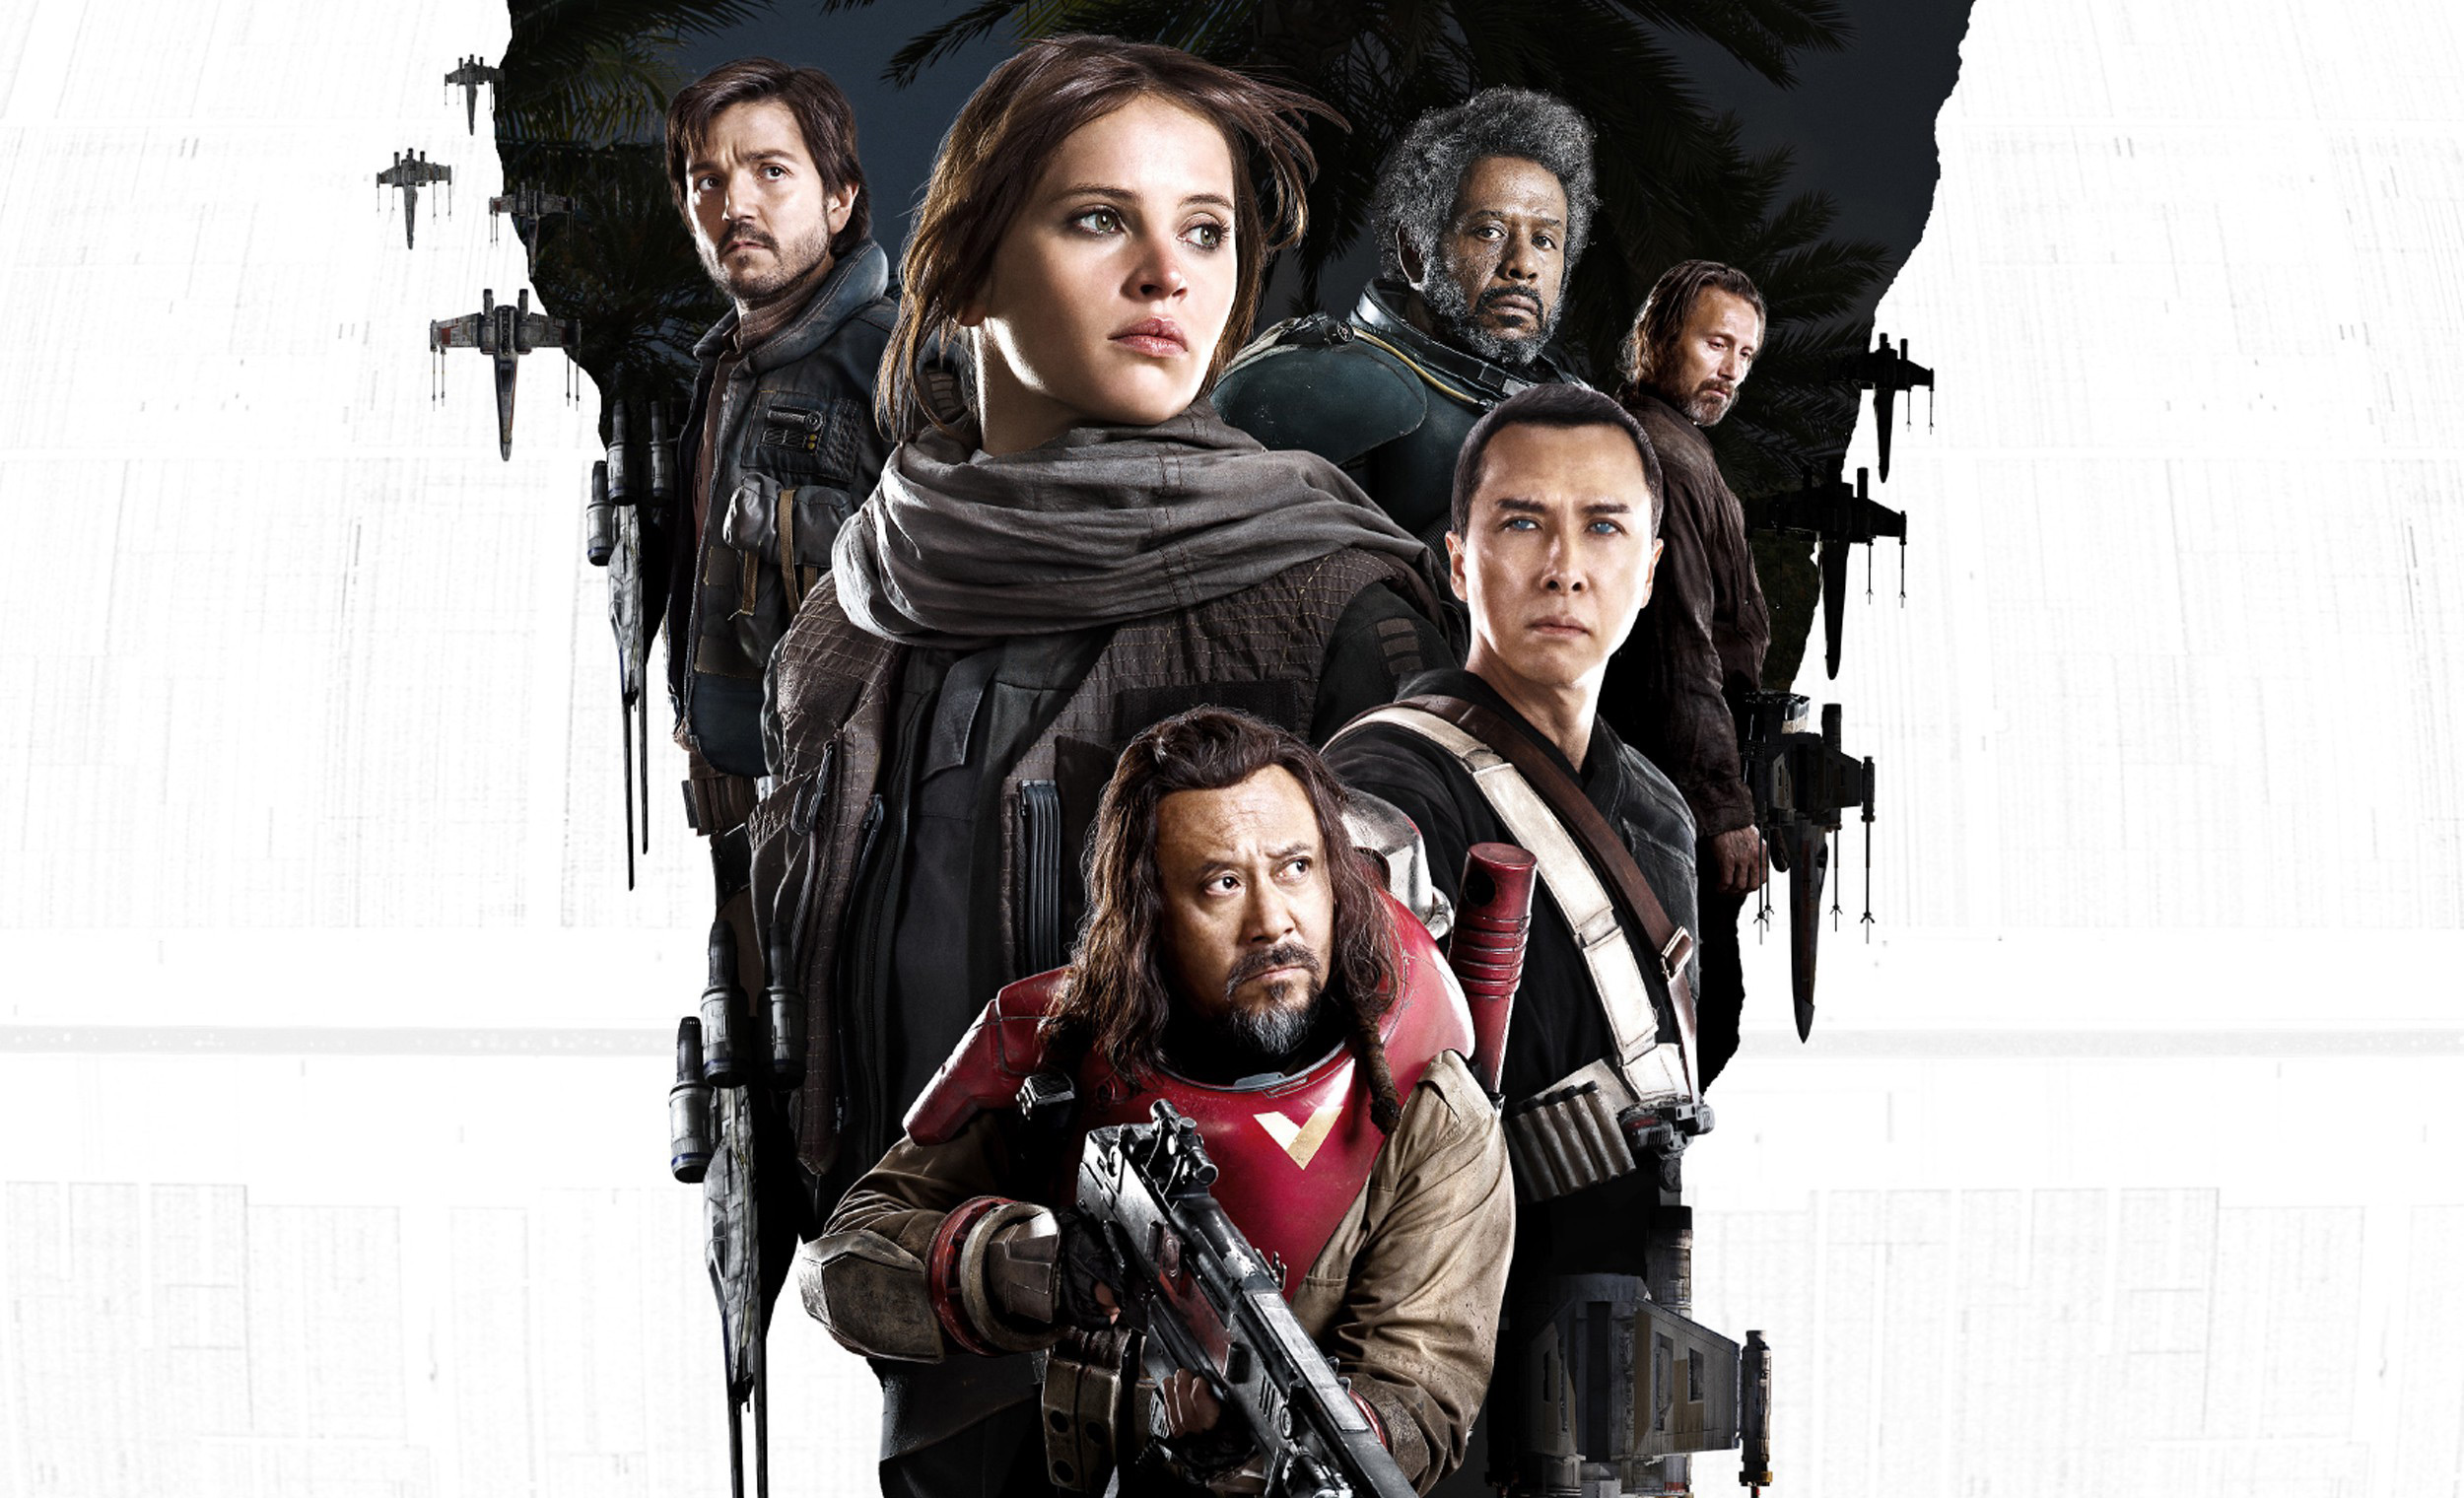 Rogue One' nostalgia reveals a major Star Wars flaw 5 years in the